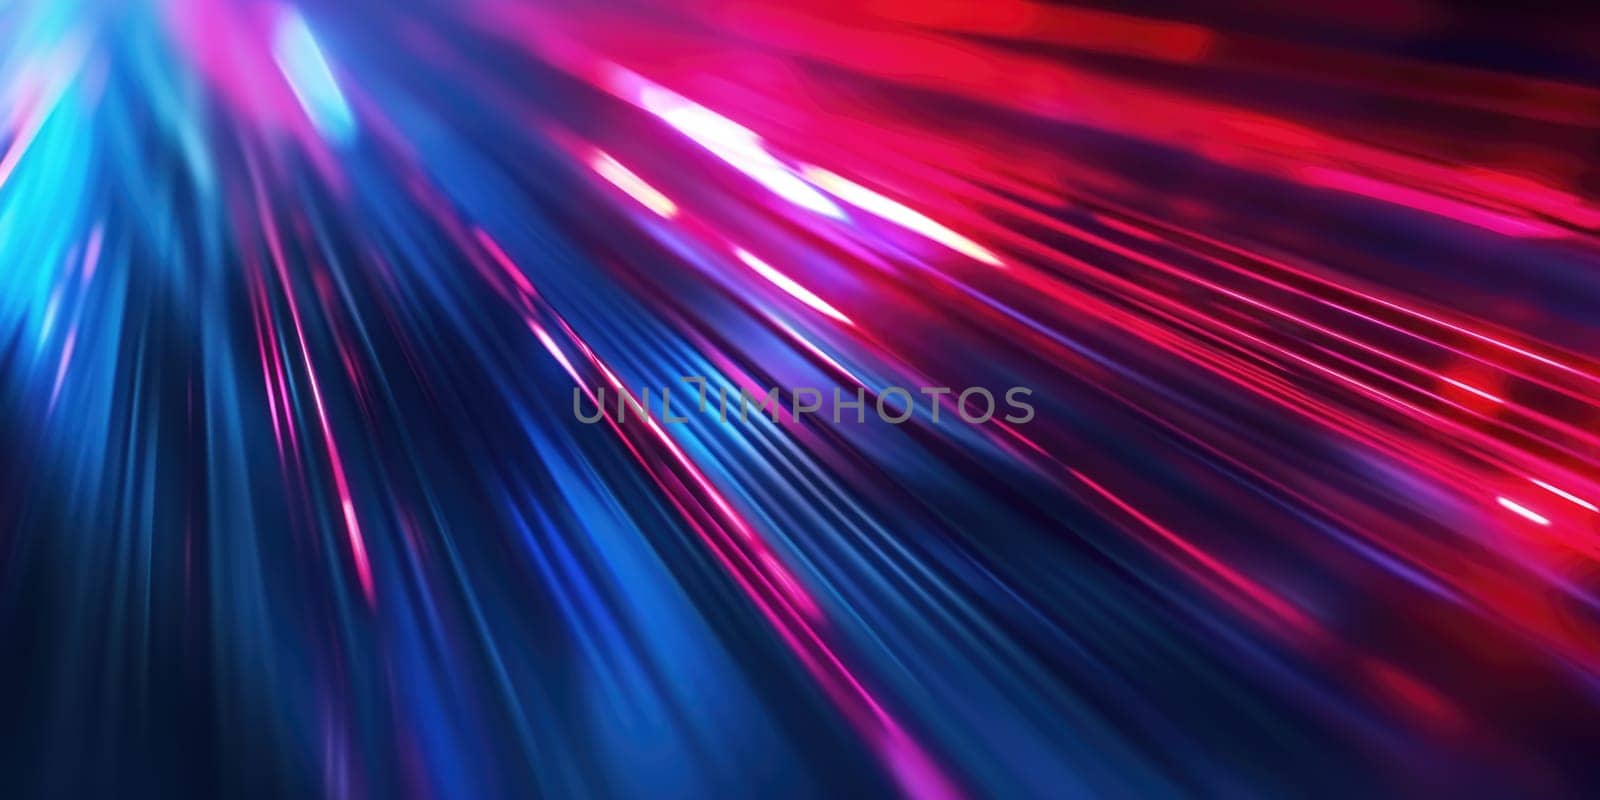 Abstract Blue and Red Light Streaks Background. Resplendent. by biancoblue